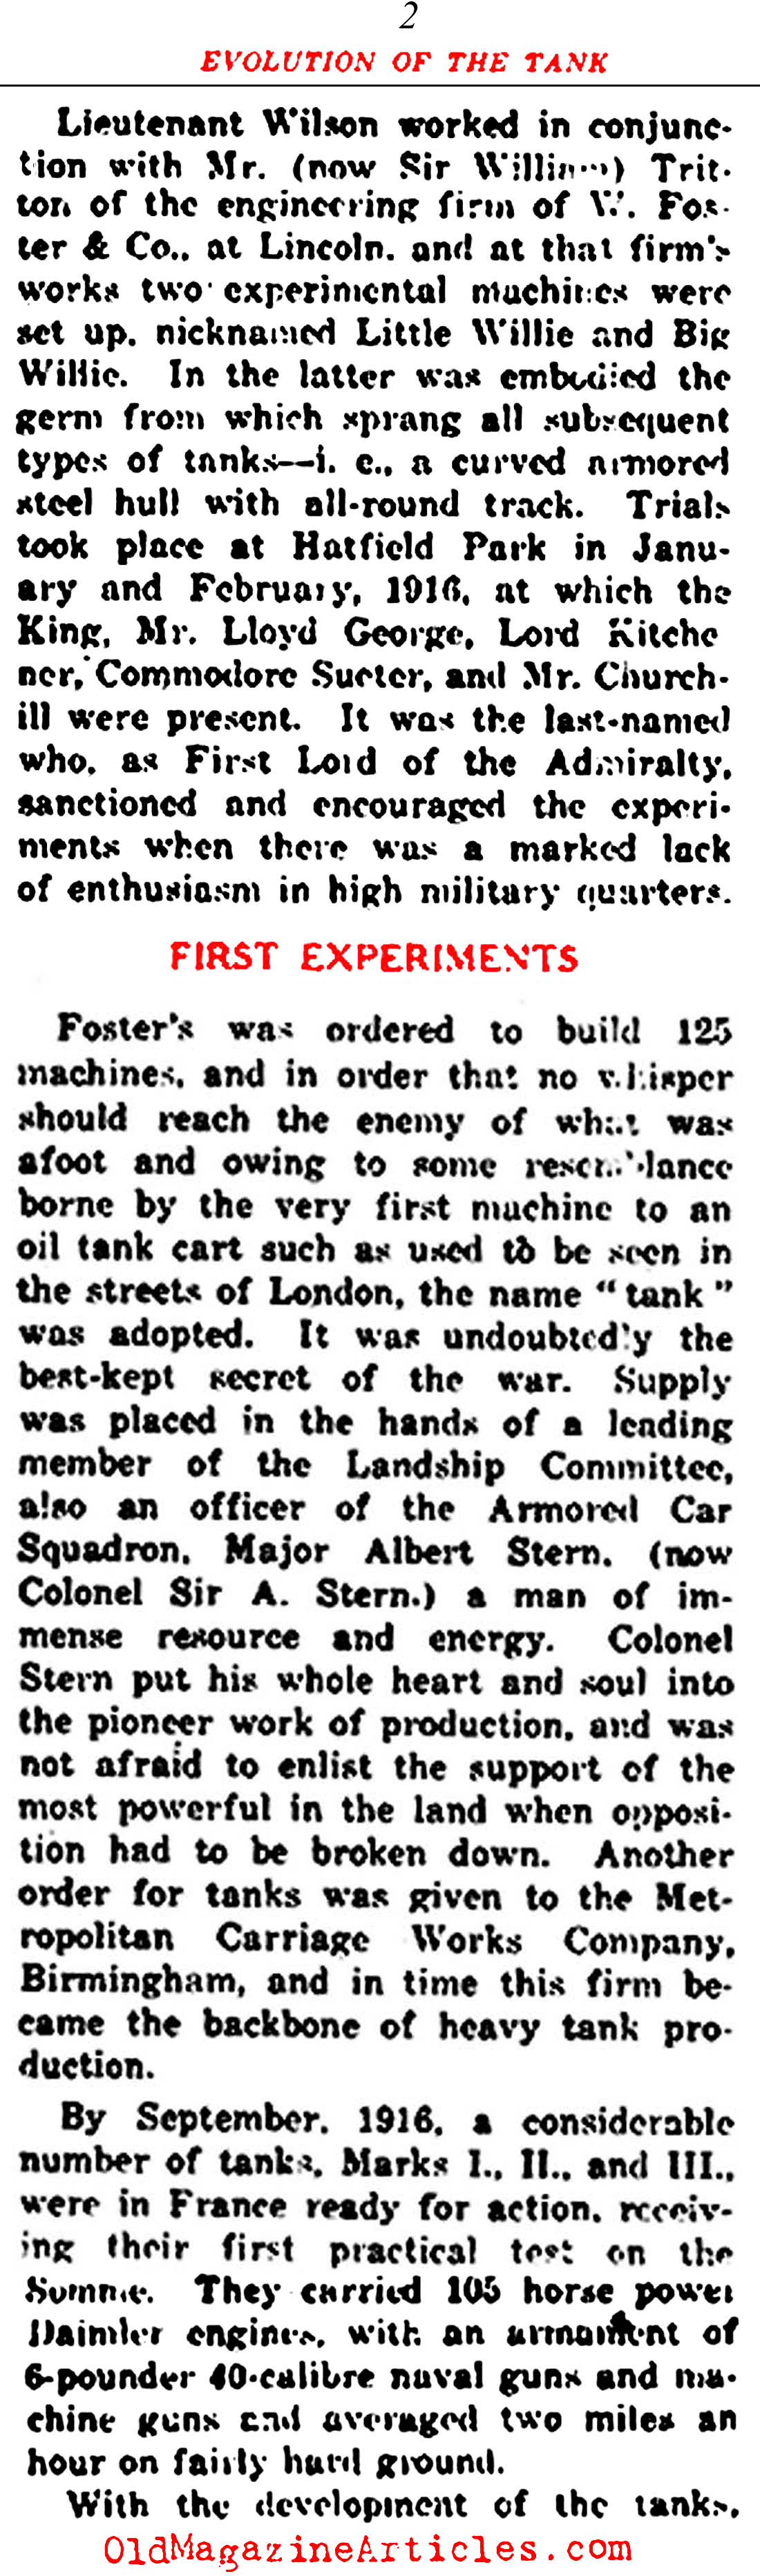 The Evolution of the Tank (NY Times, 1919)